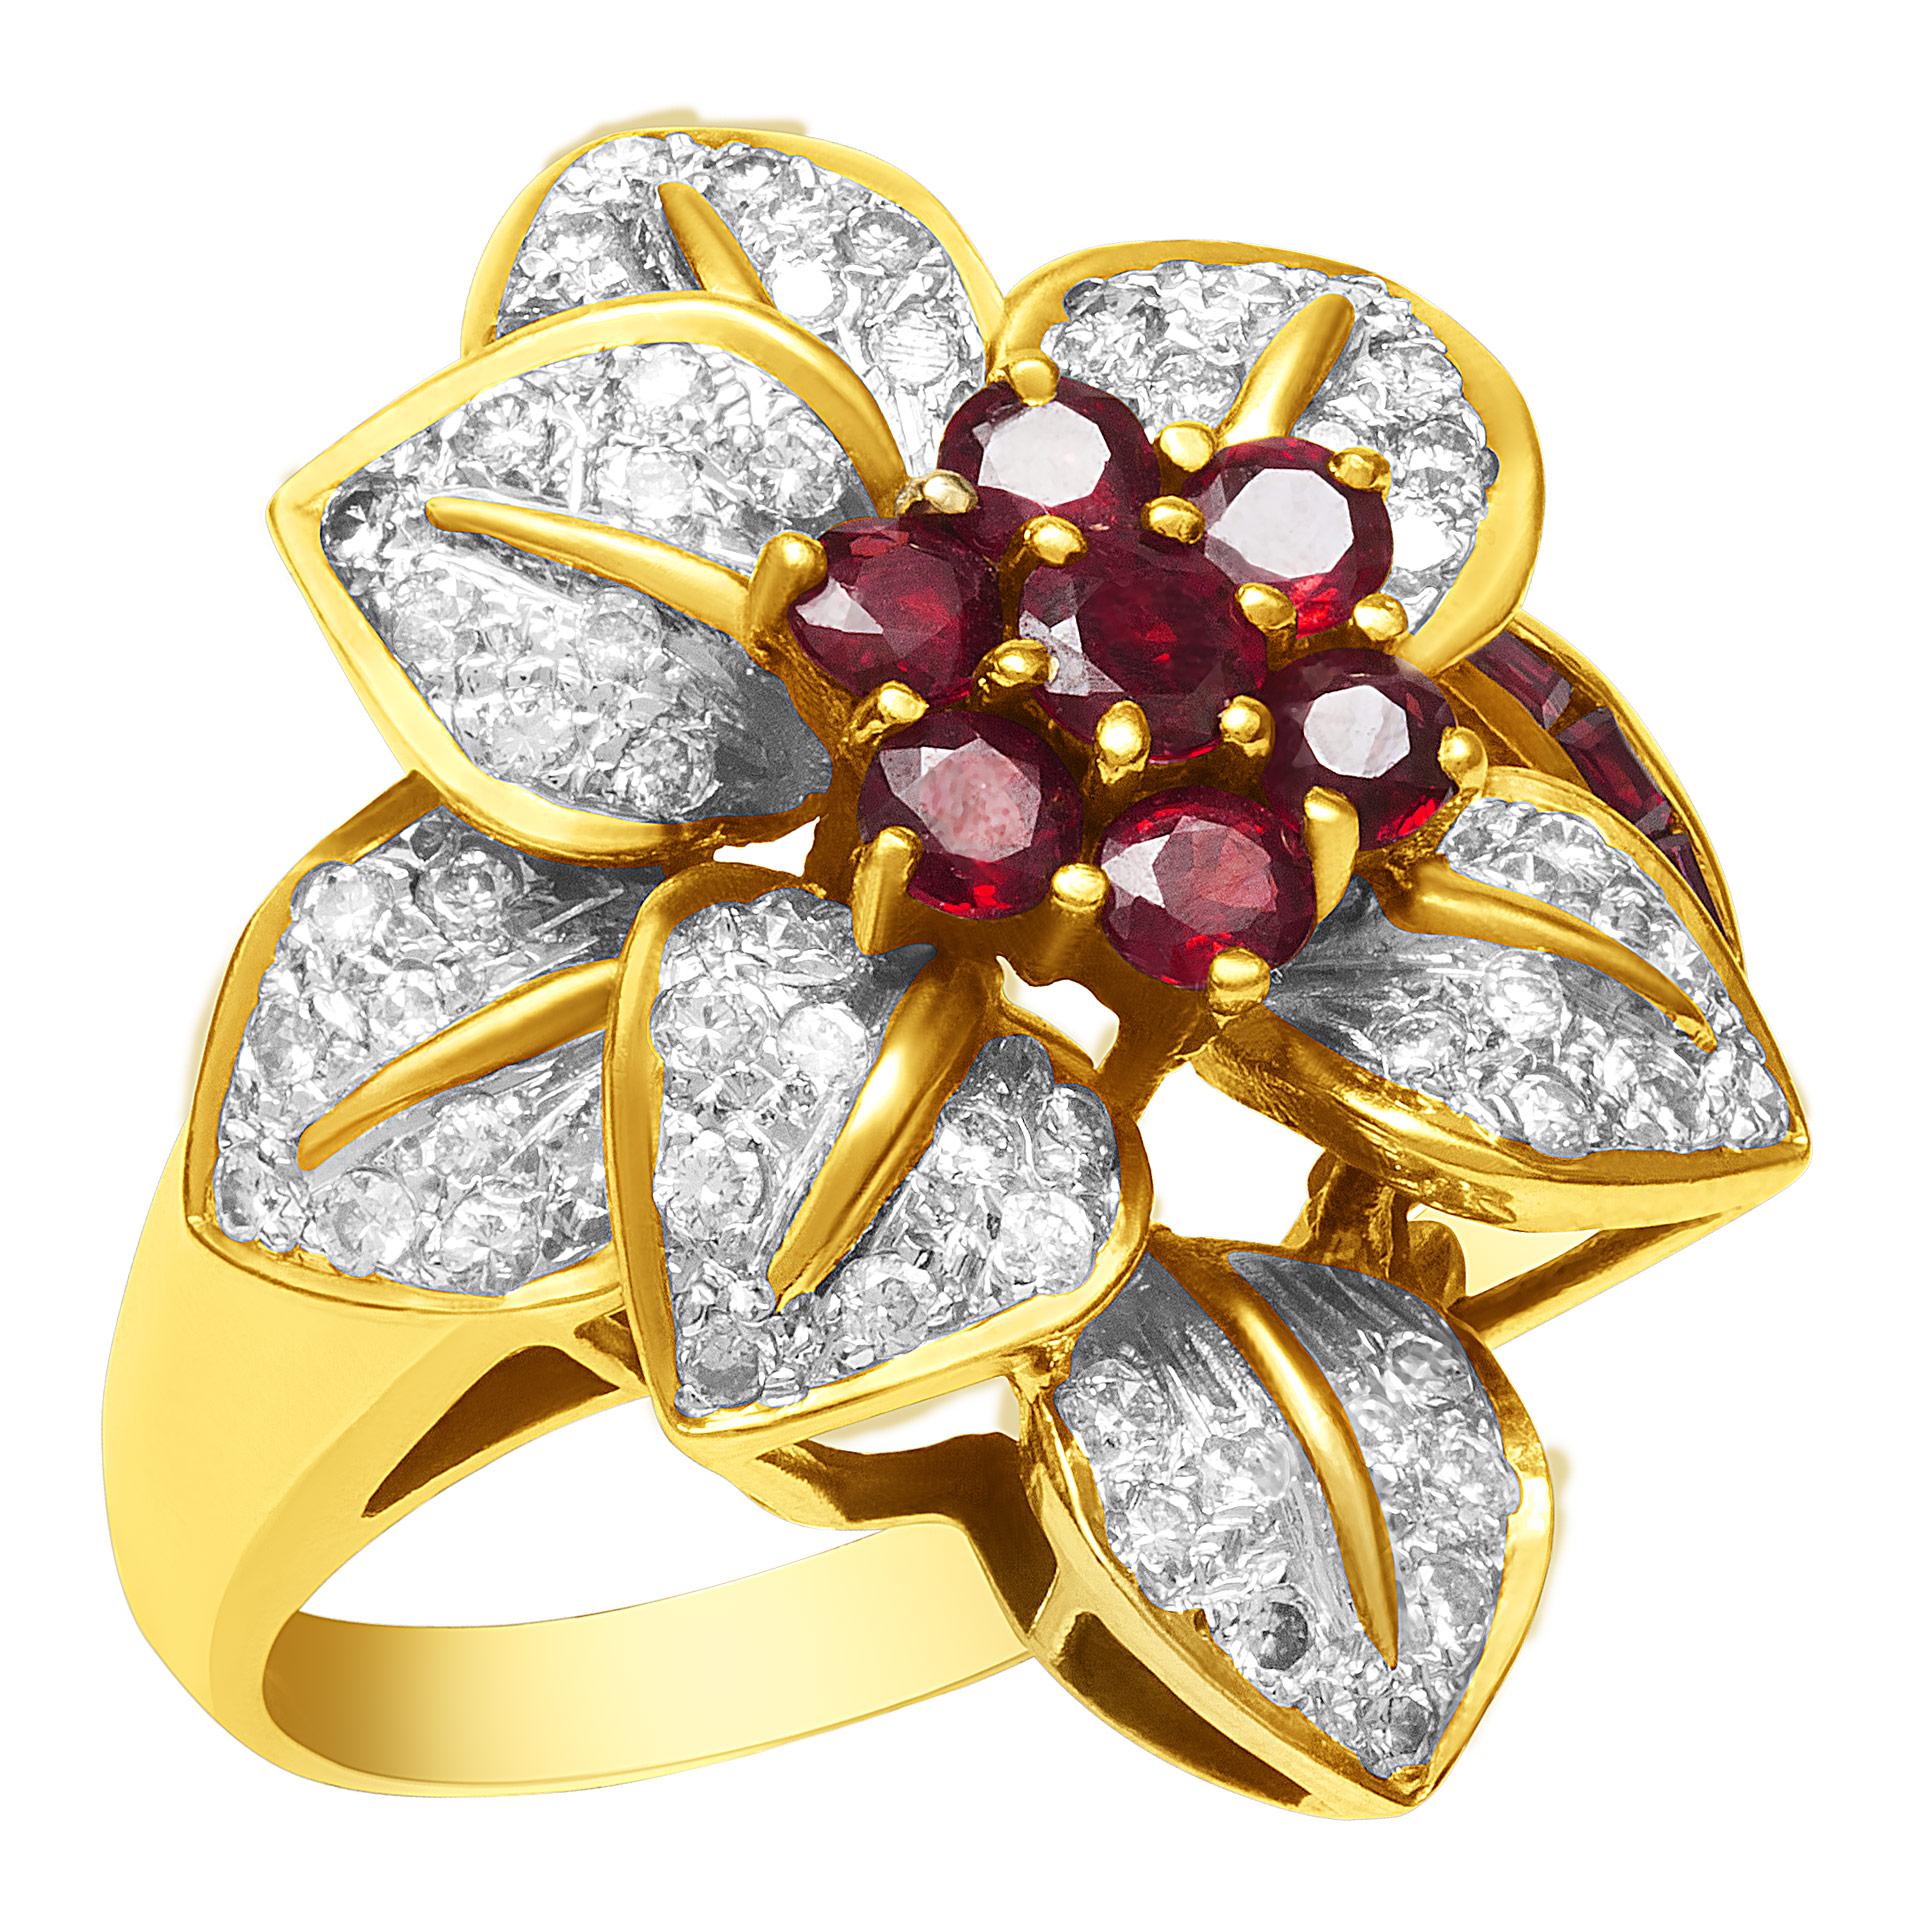 Ruby and Diamonds Flower Ring and Pendant, 2 Pieces Set in 18k Yellow Gold In Excellent Condition For Sale In Surfside, FL